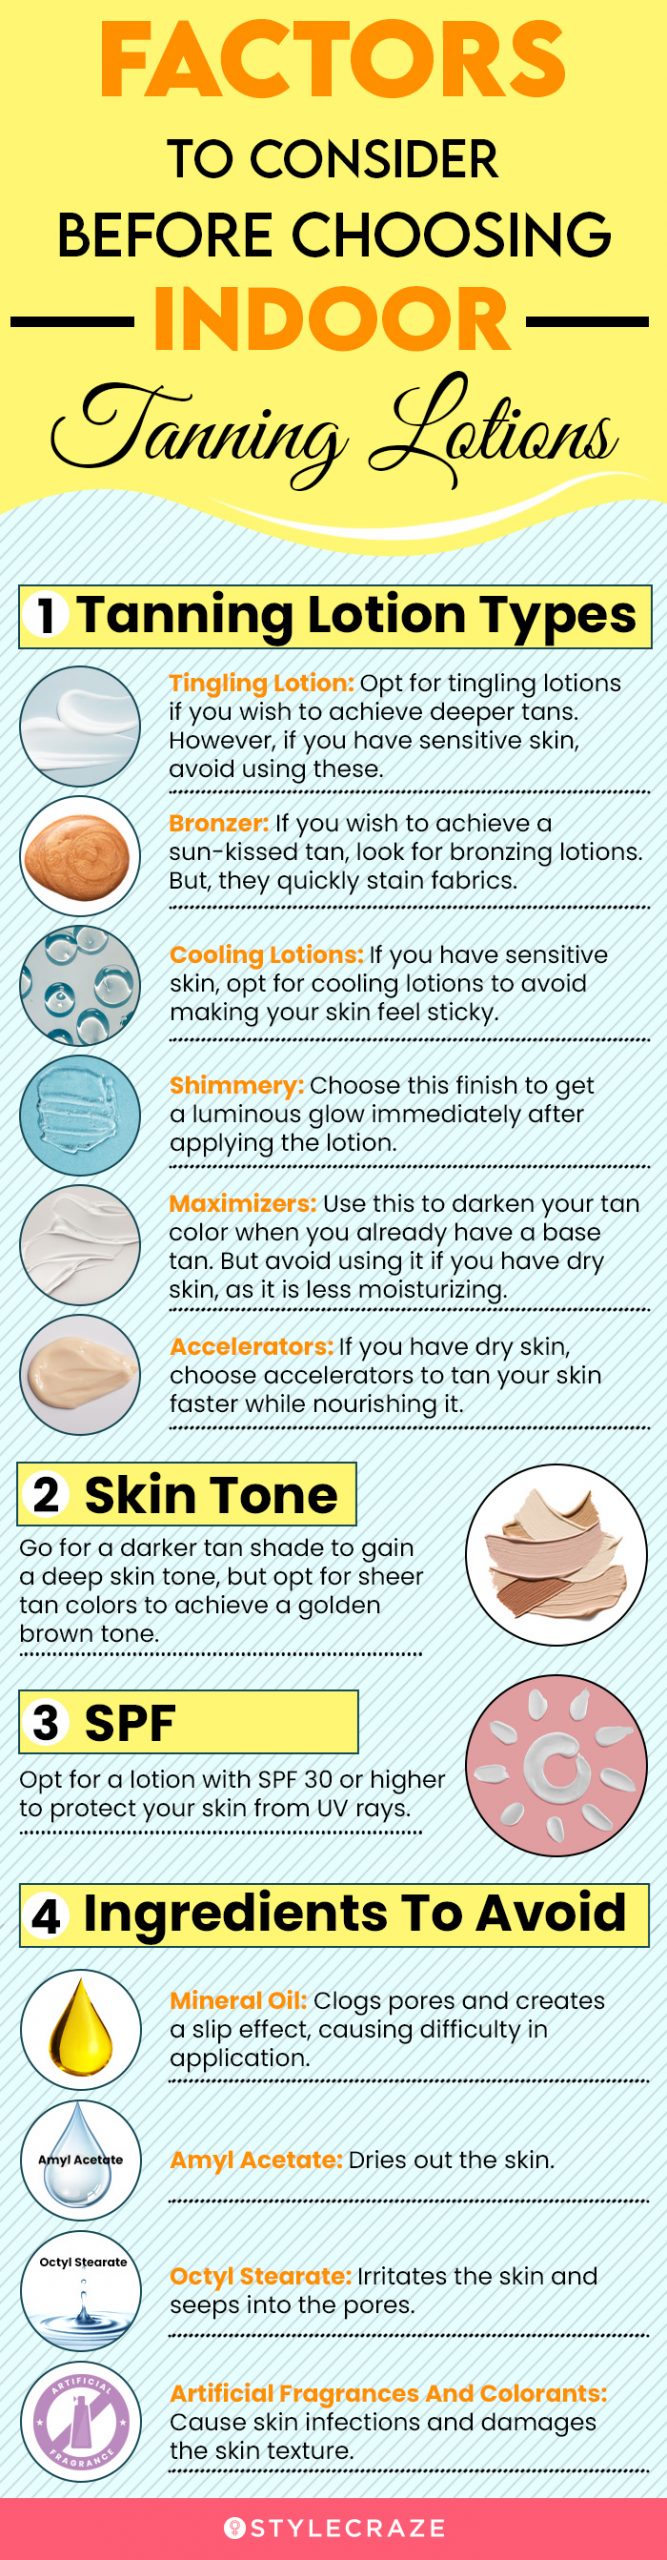 Factors To Consider Before Choosing Indoor Tanning Lotions